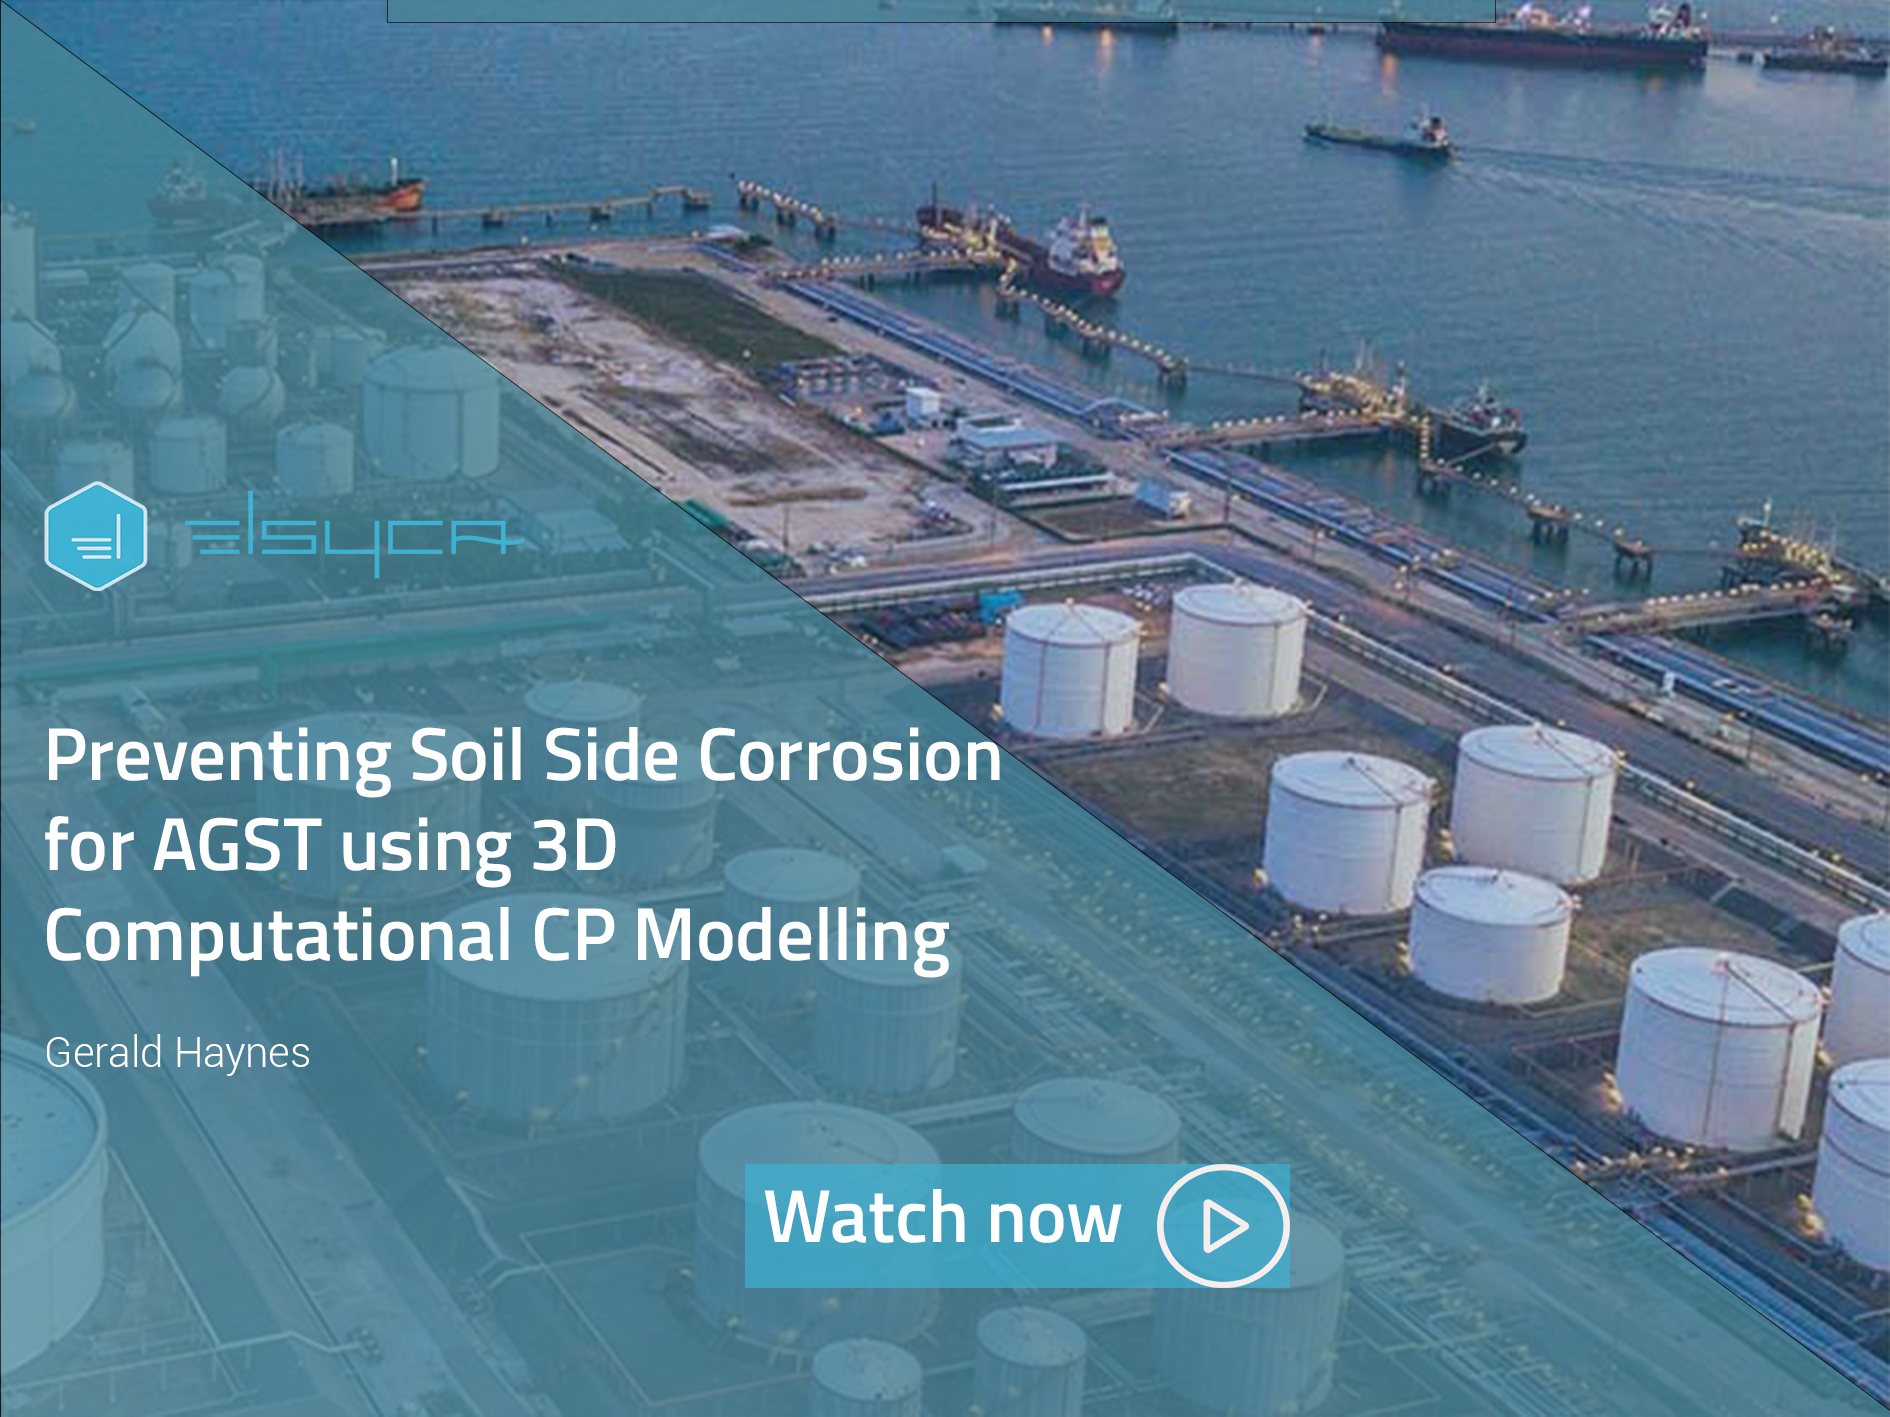 Preventing Soil Side Corrosion for AGST using 3D Computational CP Modelling